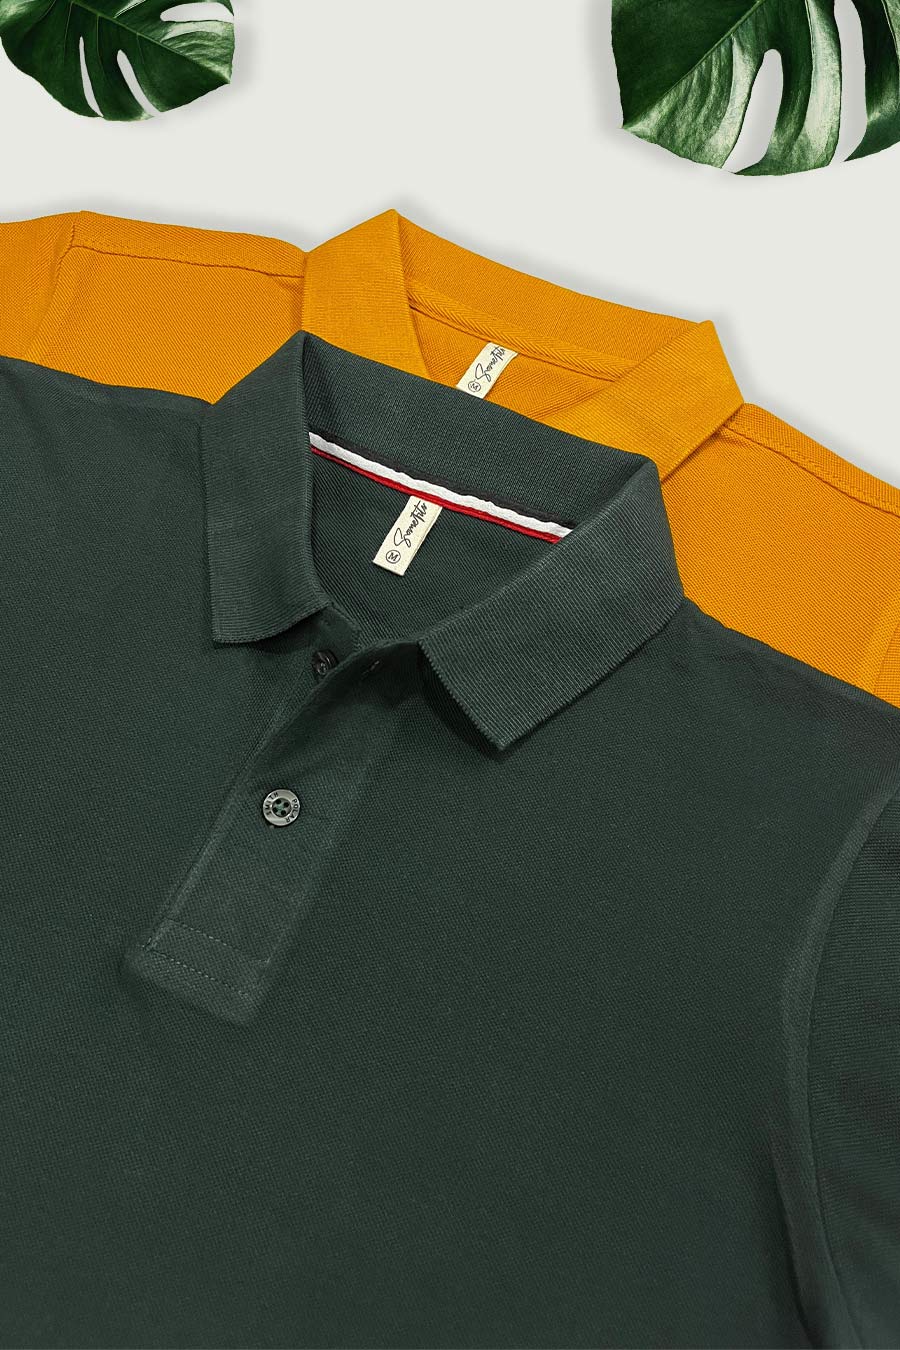 Pack 2 - Army Green & Mustard - Classic Polo